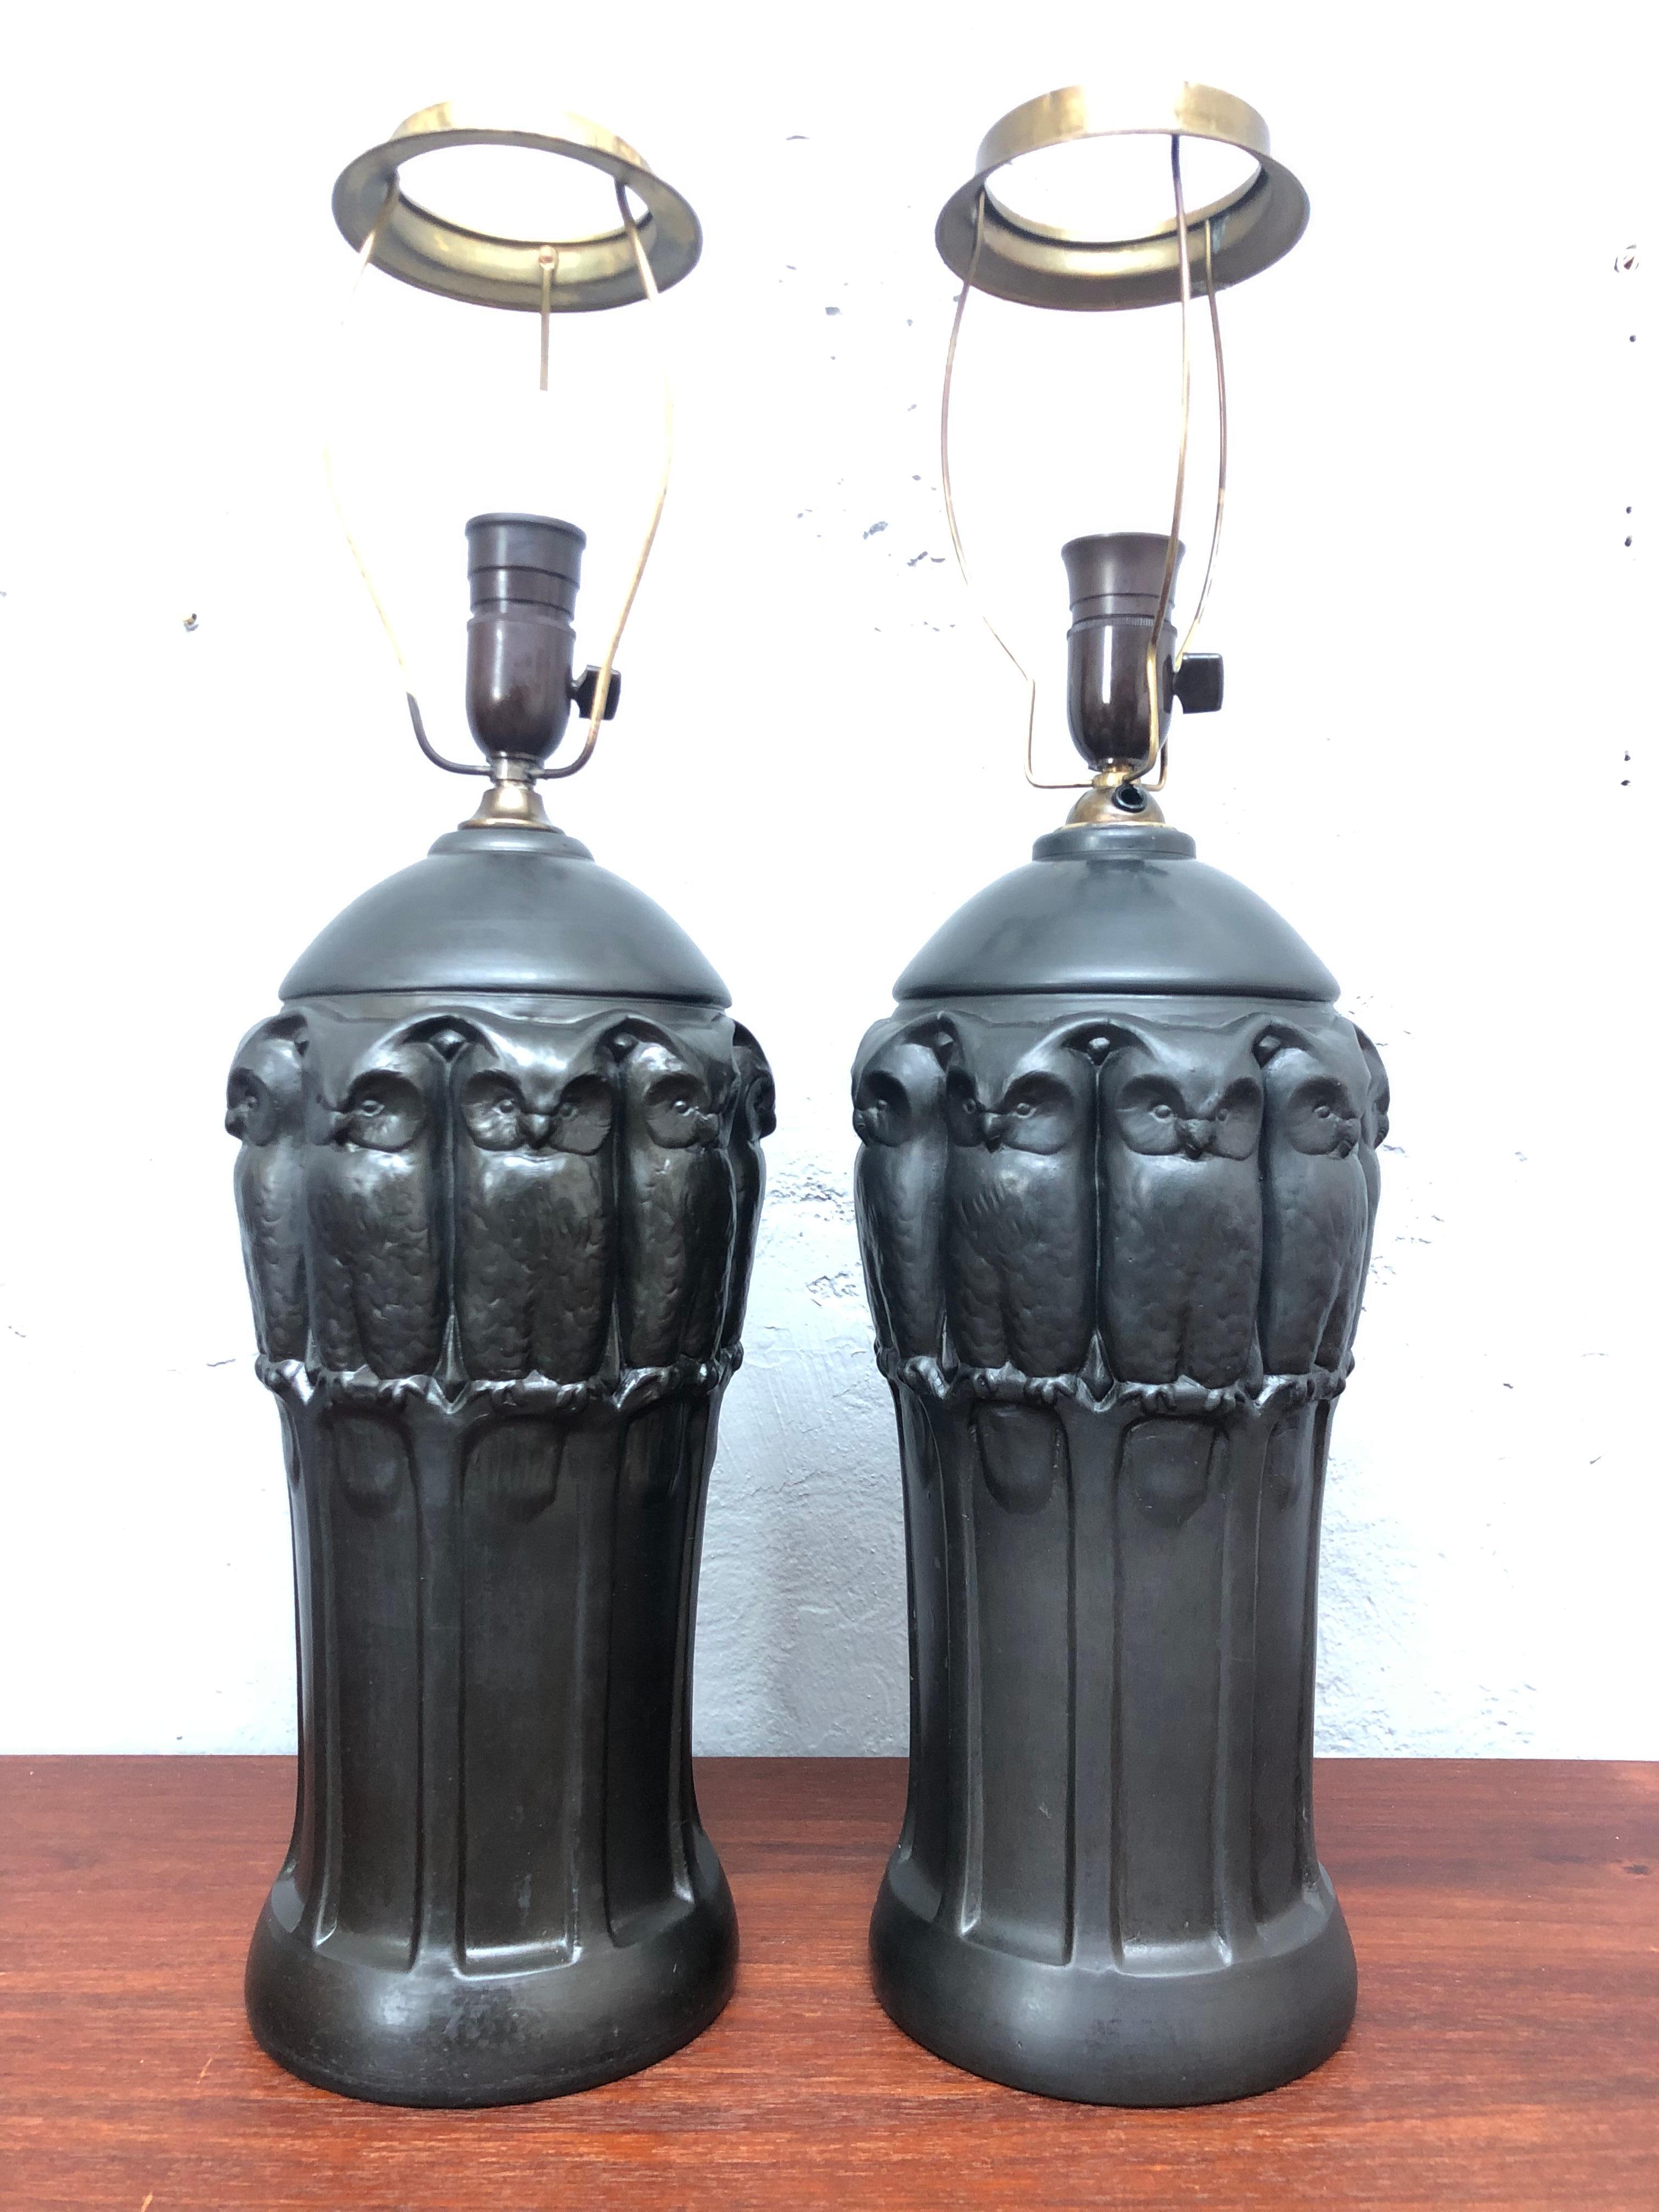 An amazing iconic pair of black pottery table lamps with owls by Lauritz Adolph Hjorth of Bornholm Denmark.
The lamps have been rewired with a black twisted cloth flex and insulated where it passes through the brass collar.
Bakelite bulb holder with